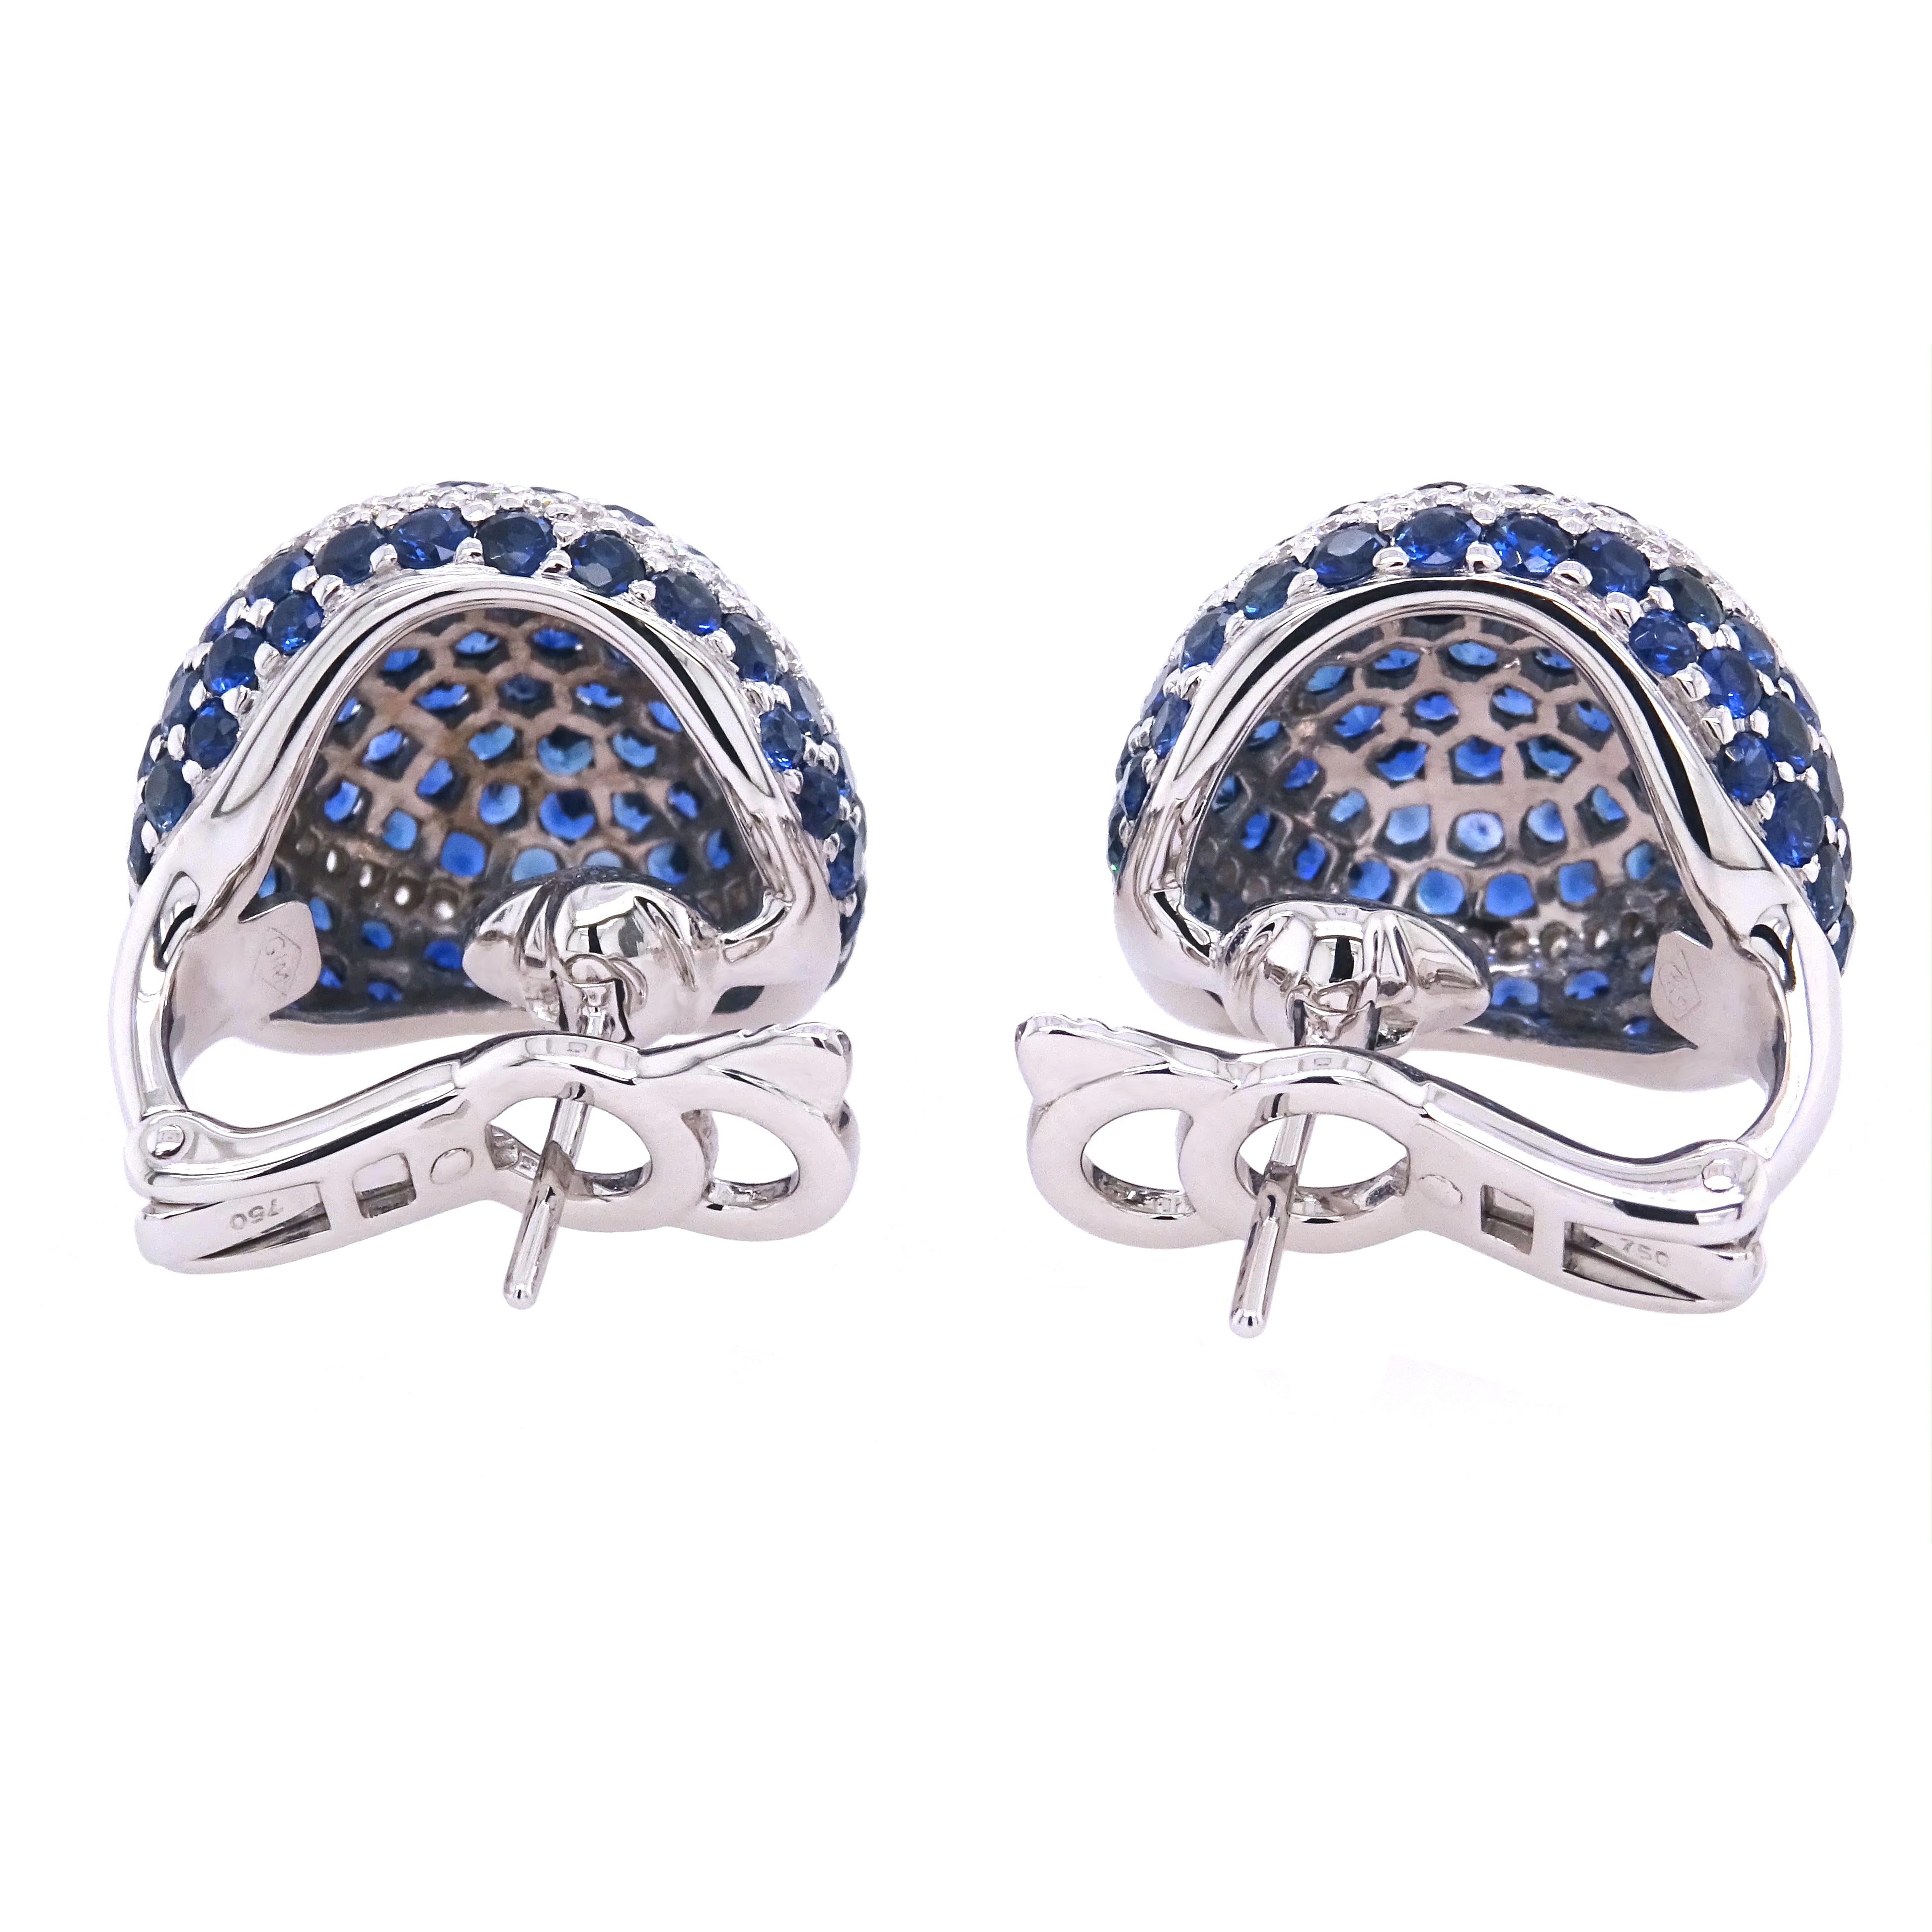 Round Cut Diamonds and Blue Sapphire Earrings in 18K White Gold